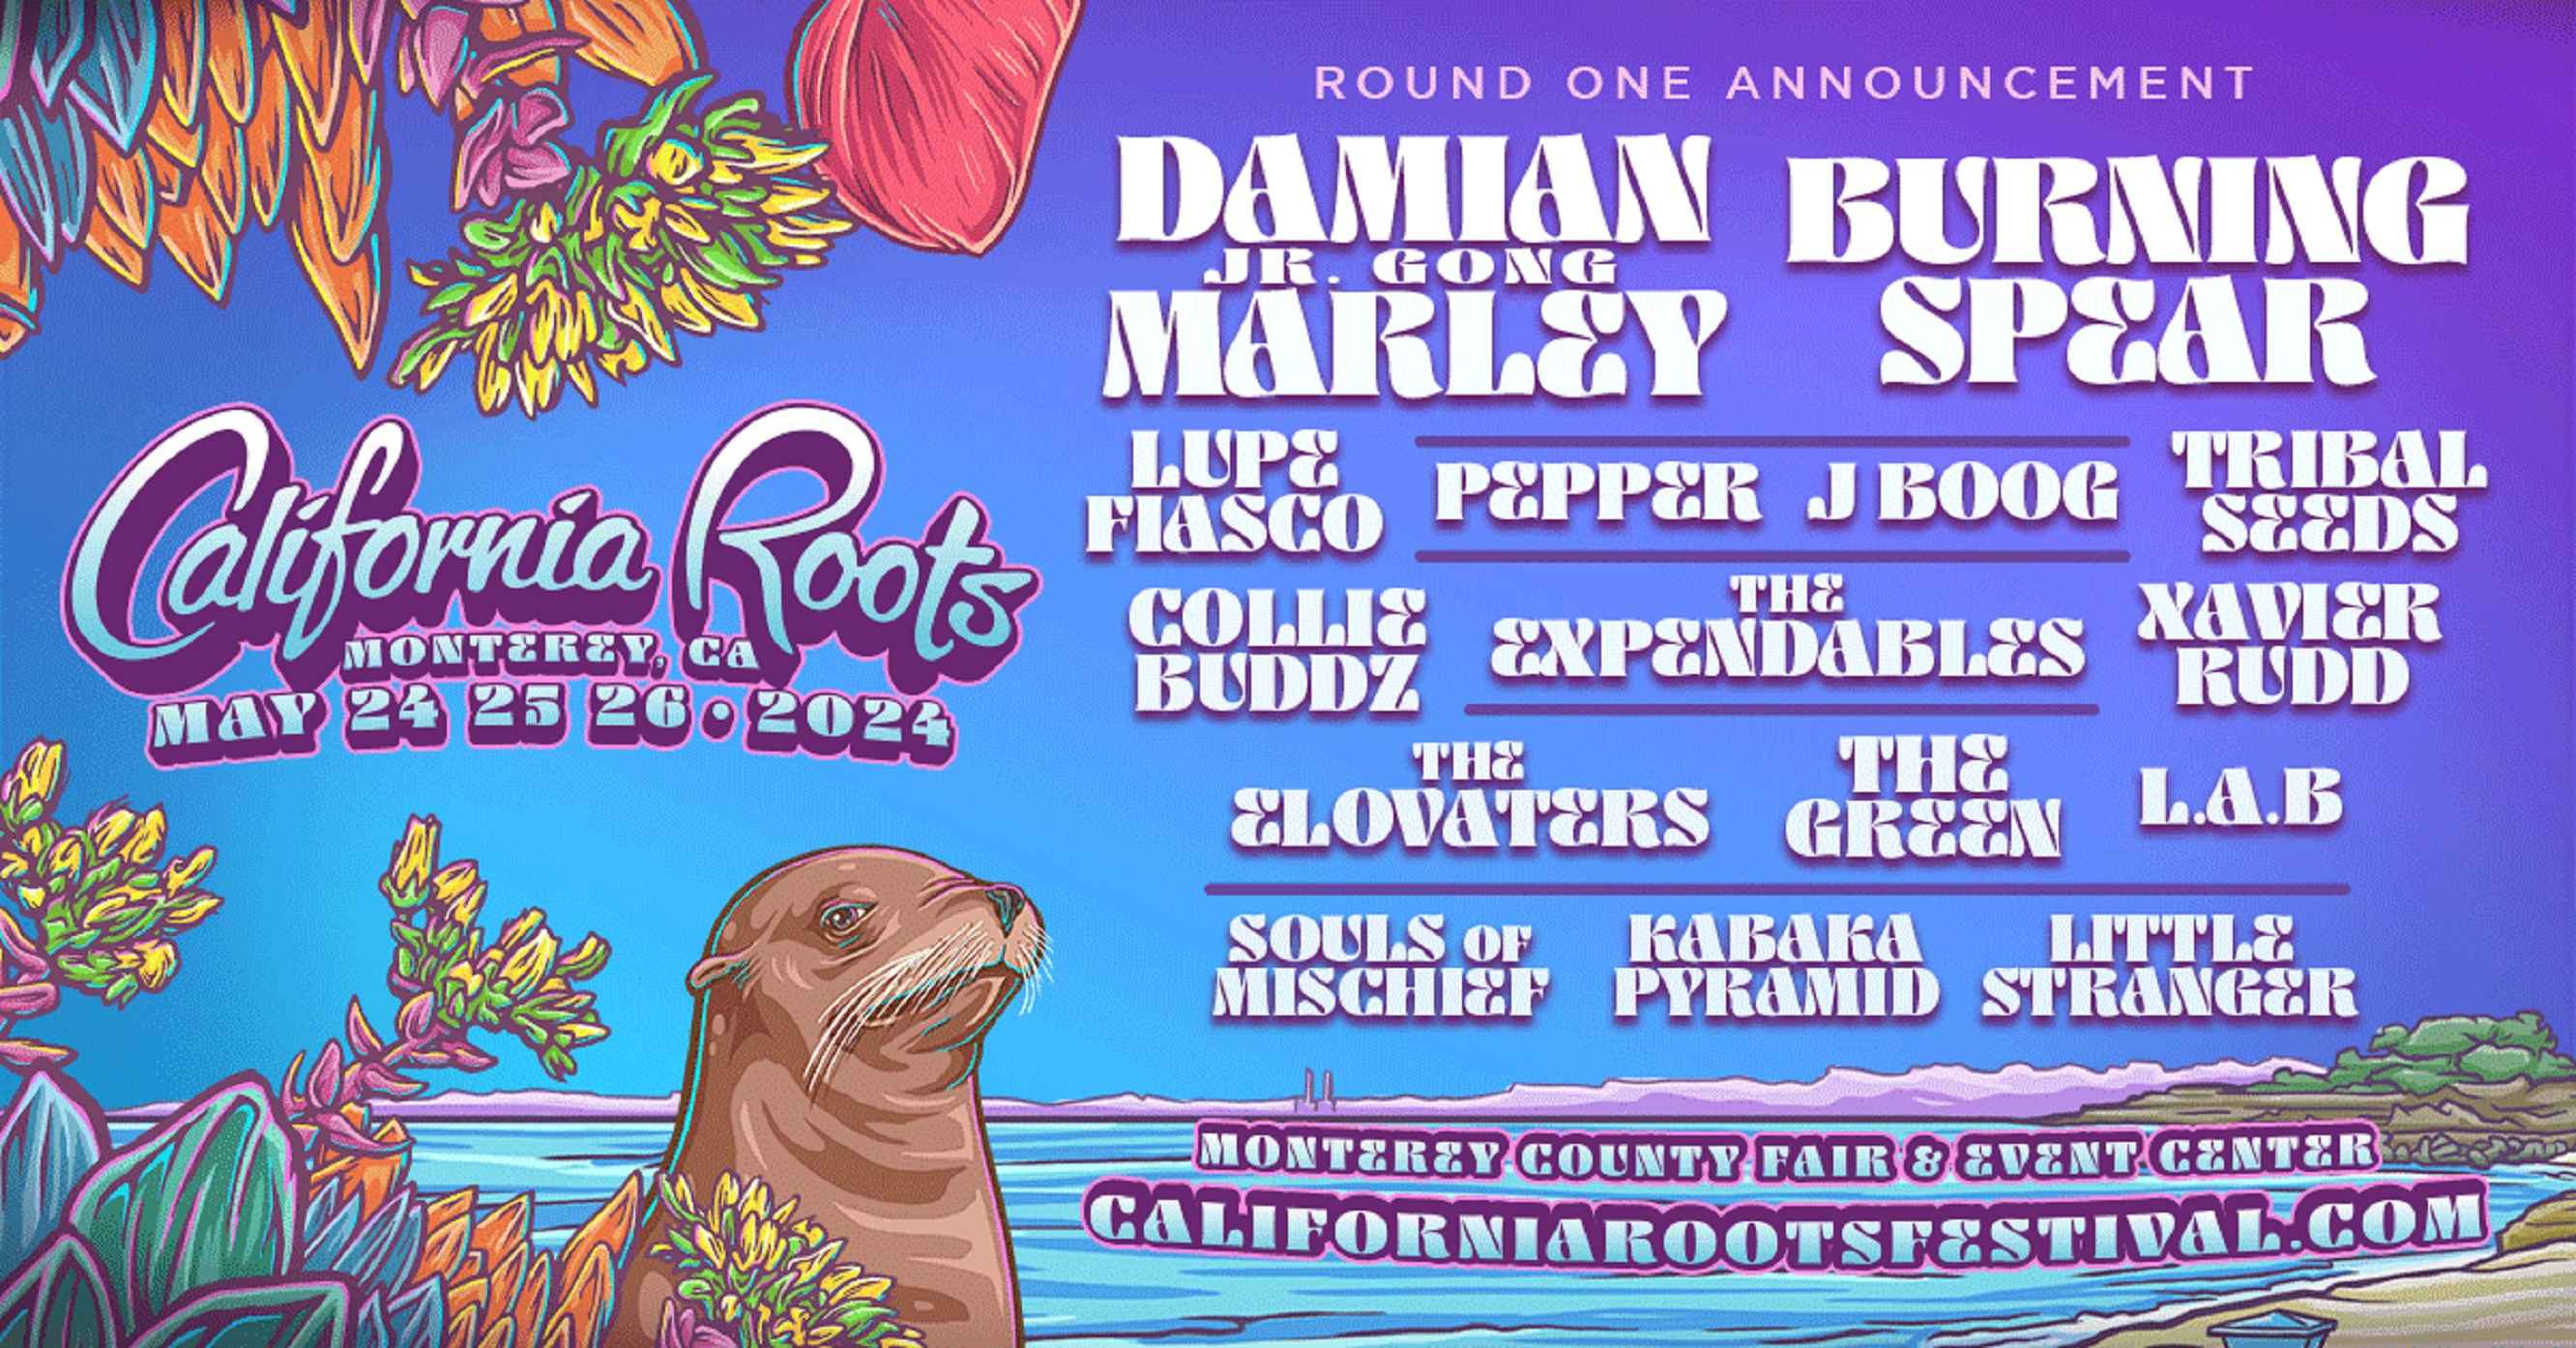 California Roots Music And Arts Festival Returns In 2024 With Damian ‘Jr Gong’ Marley, Burning Spear, Lupe Fiasco, Pepper, And Many More